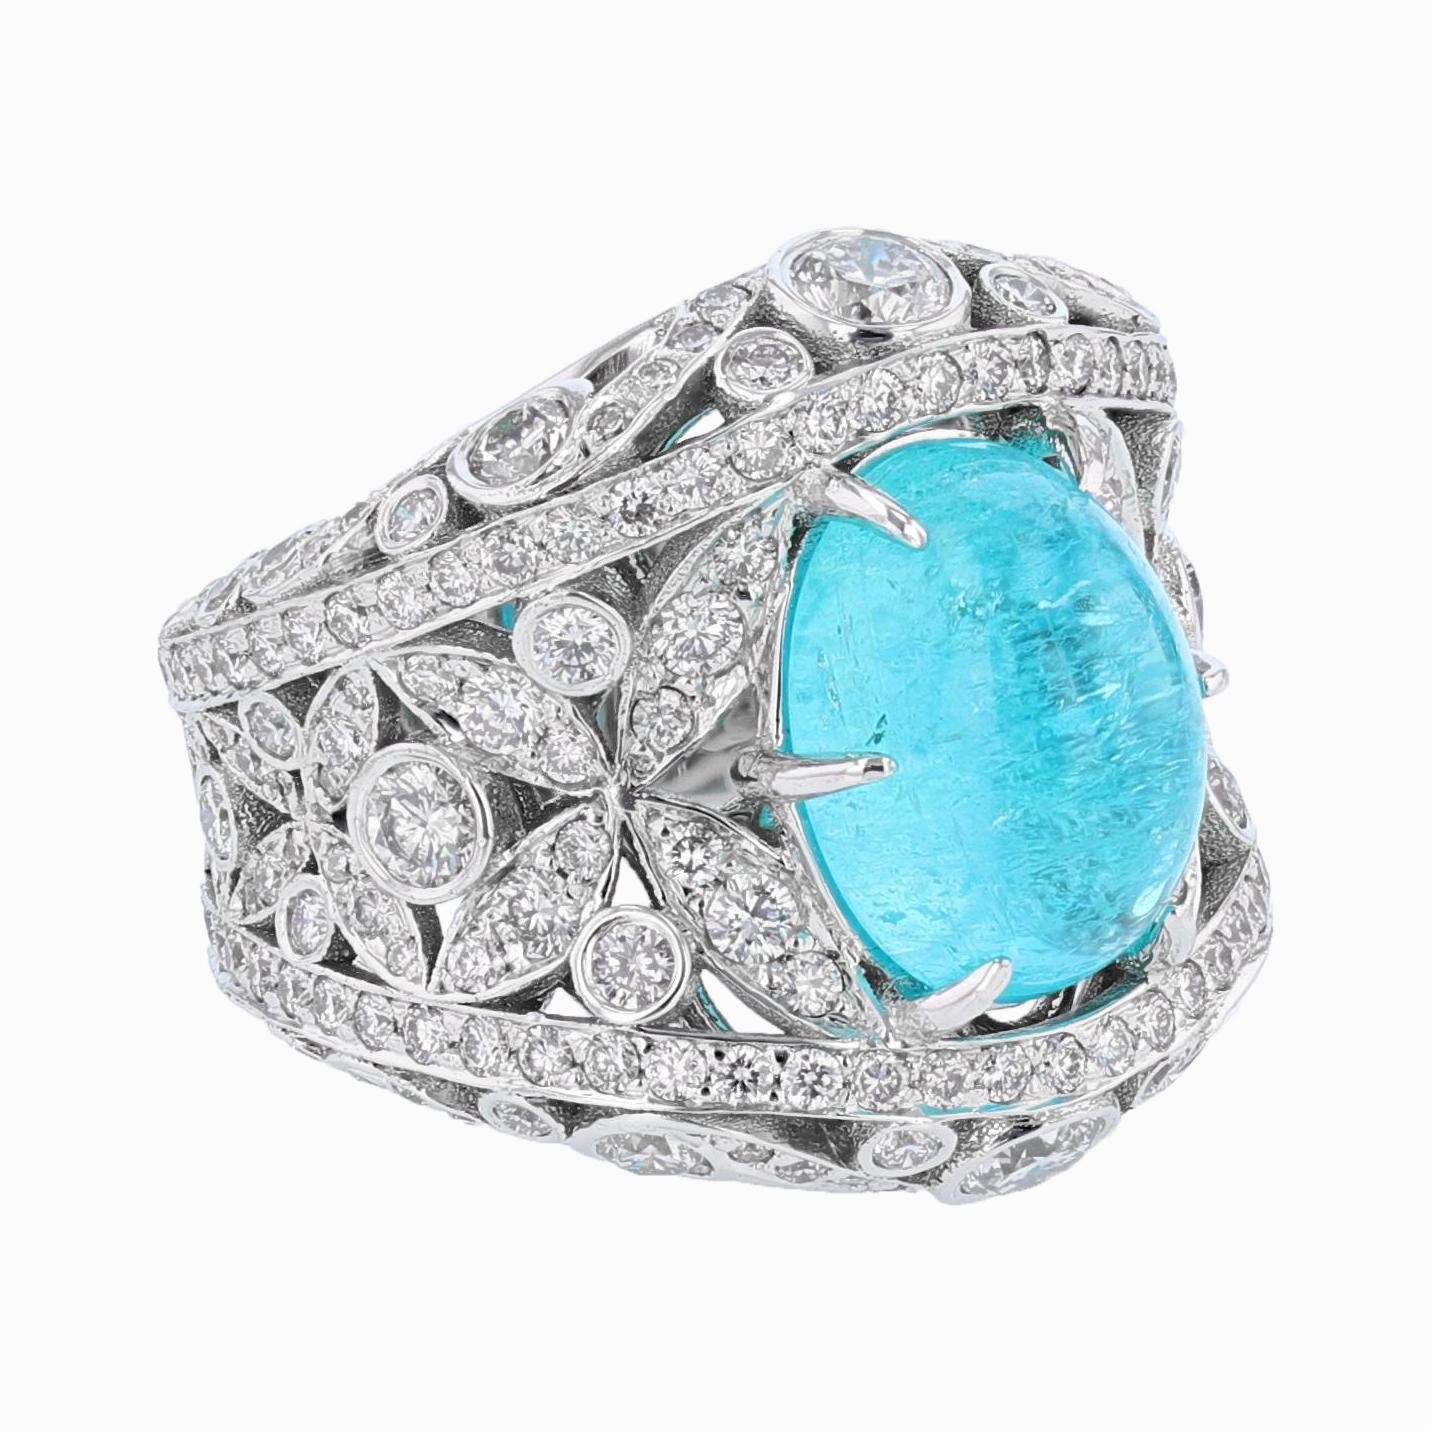 This ring is designed by Nazarelle and is made in 18k white gold. The center stone is a Brazilian 5.27ct GIA certified Paraiba Tourmaline oval cabochon. The certificate number is GIA 1172211578. The mounting features 218 round cut diamonds pave set